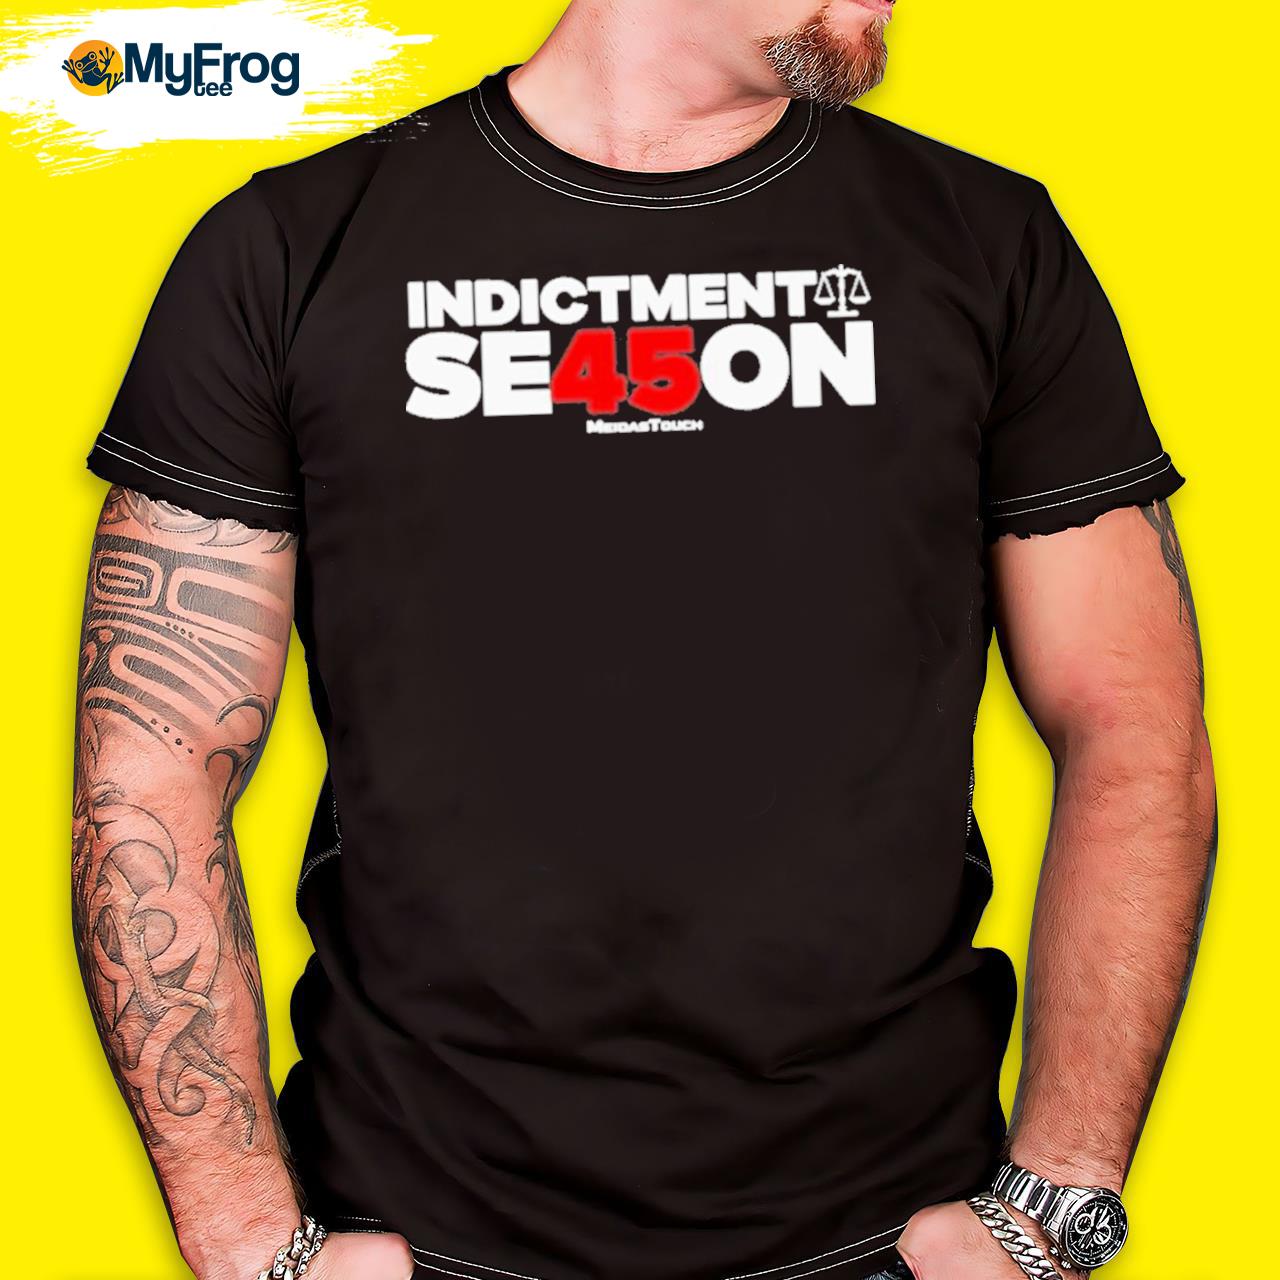 Indictment se45on media touch shirt